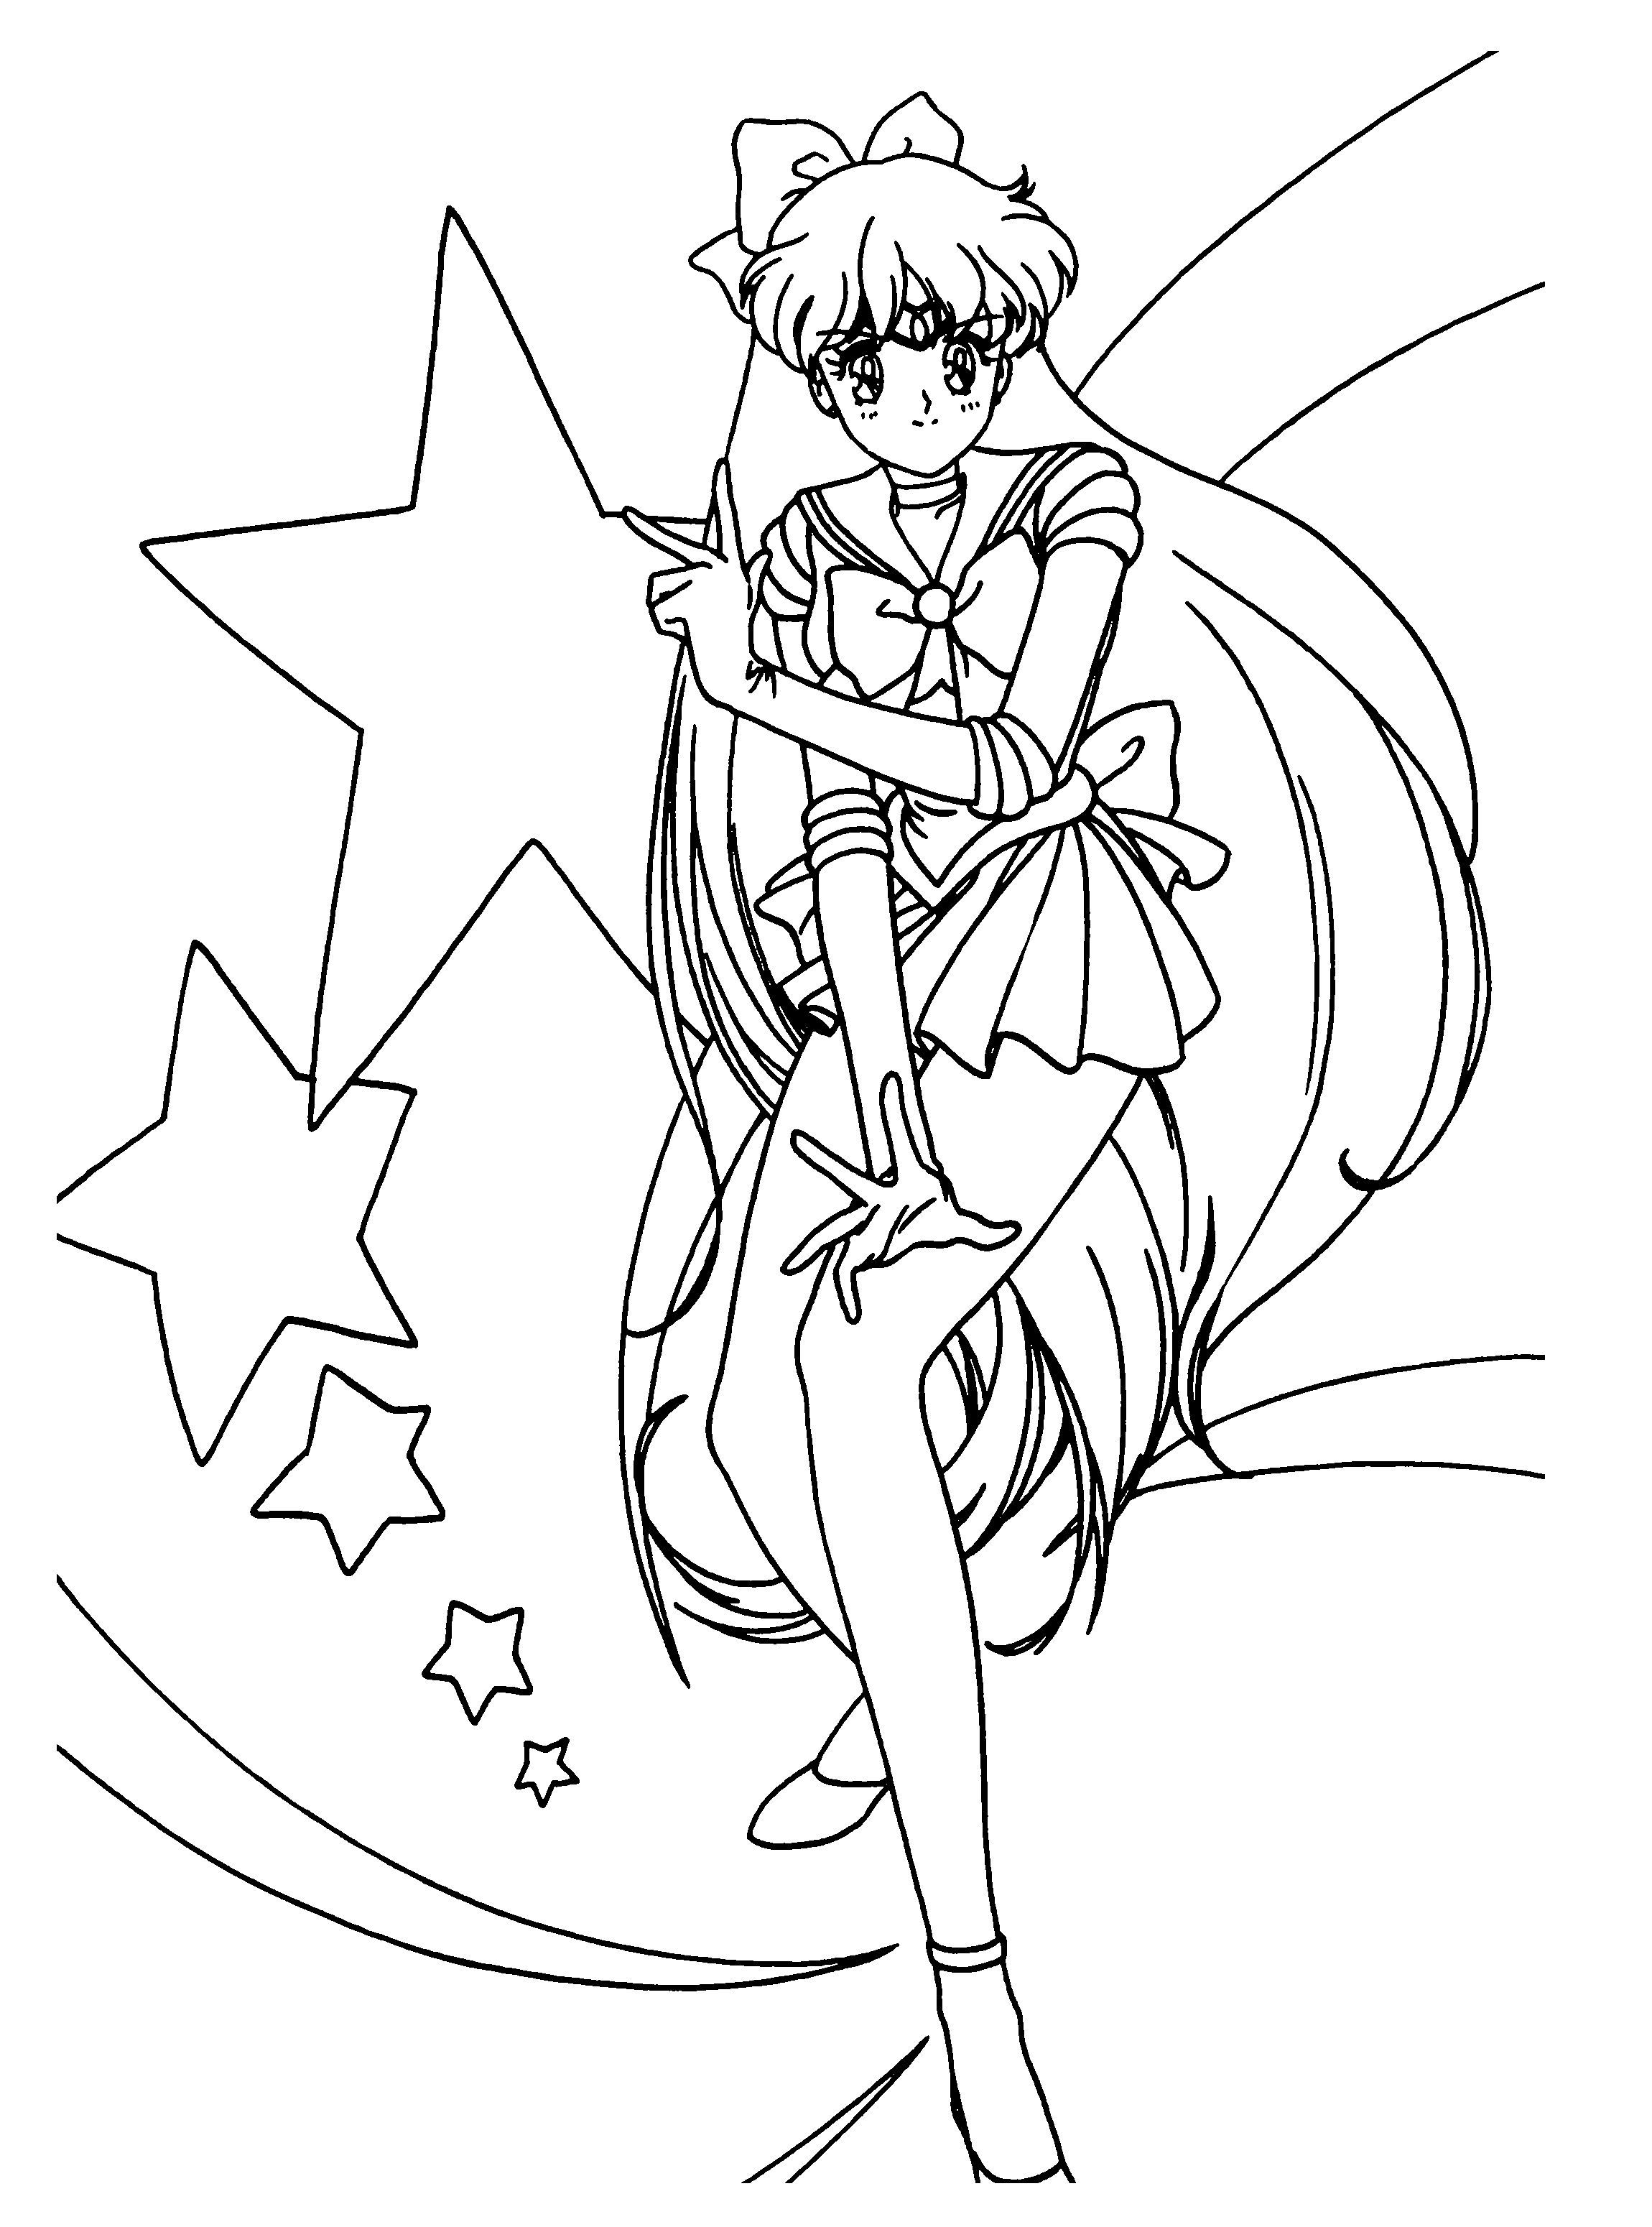 Coloring Page - Sailormoon coloring pages 58